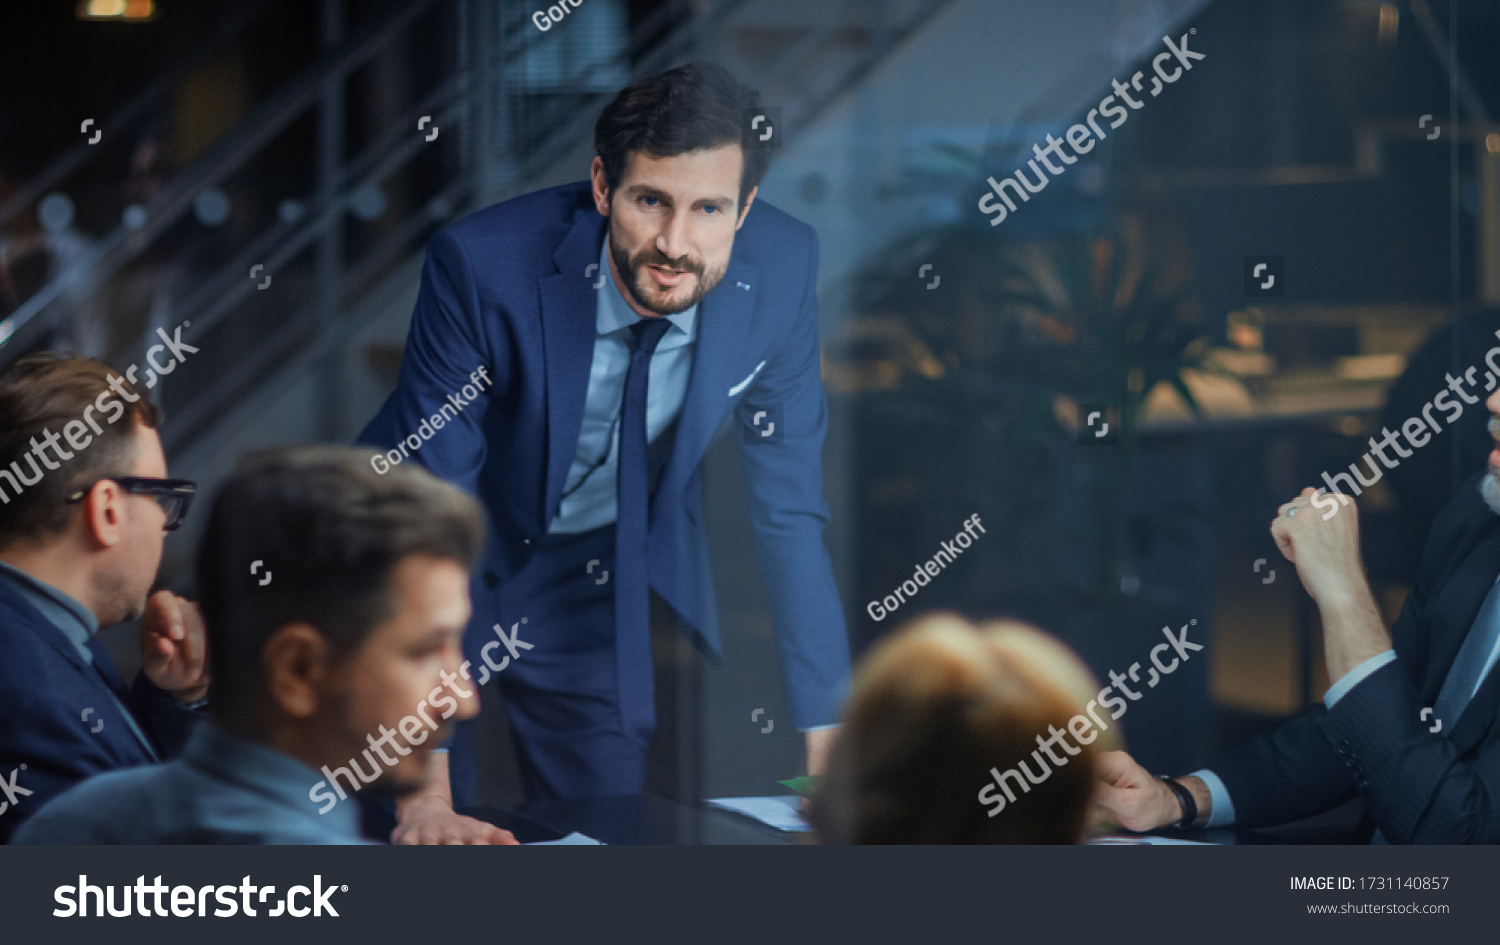 Corporate Meeting Room: Confident and Handsom Executive Director Decisively Leans on a Conference Table and Delivers Report to a Board of Executives about Company’s Record Breaking Revenue #1731140857